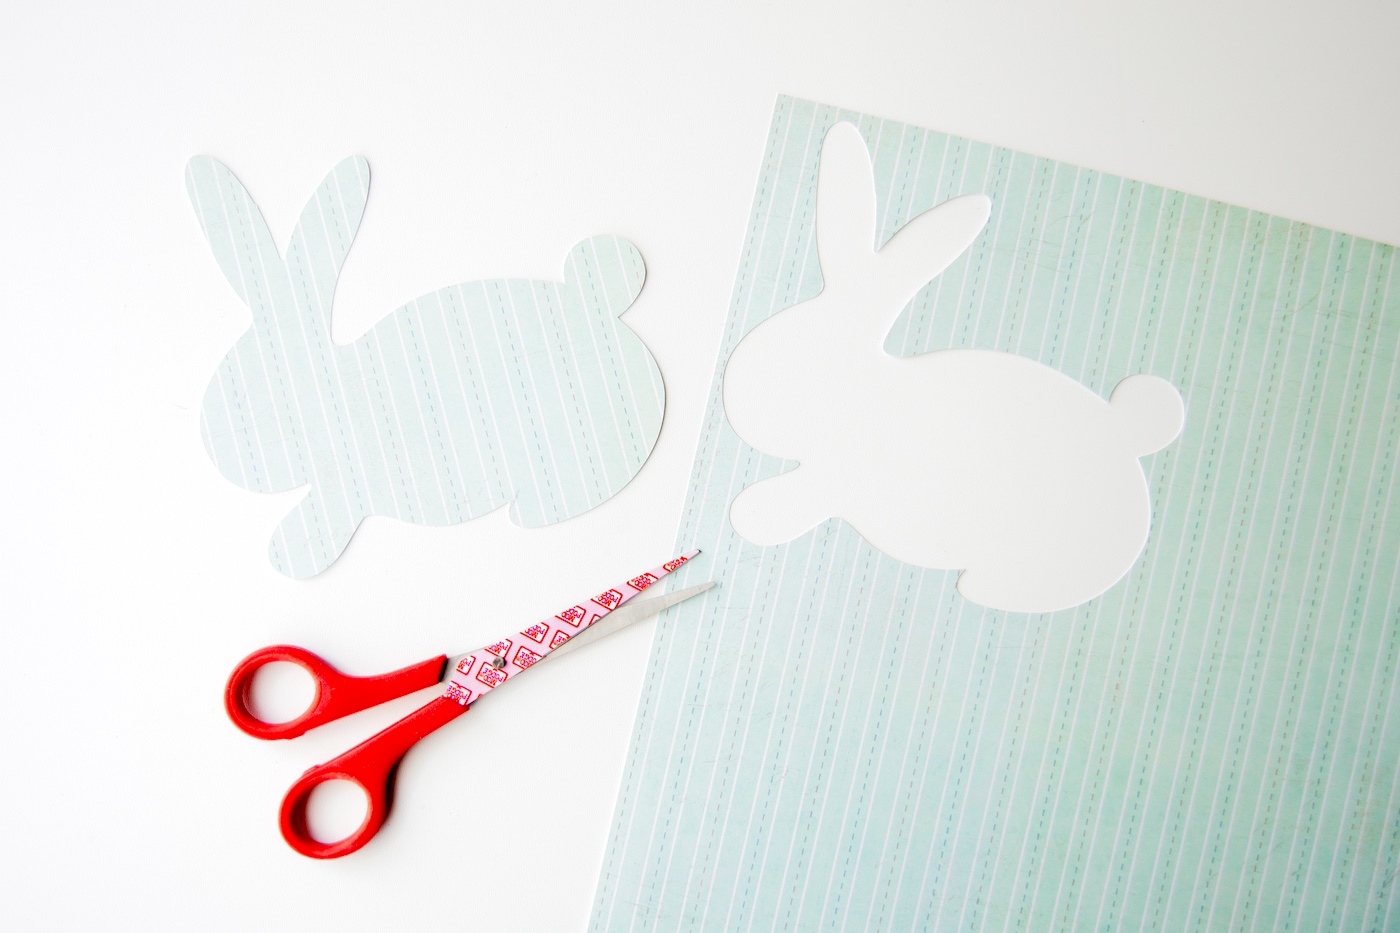 Cut the Bunny Silhouette